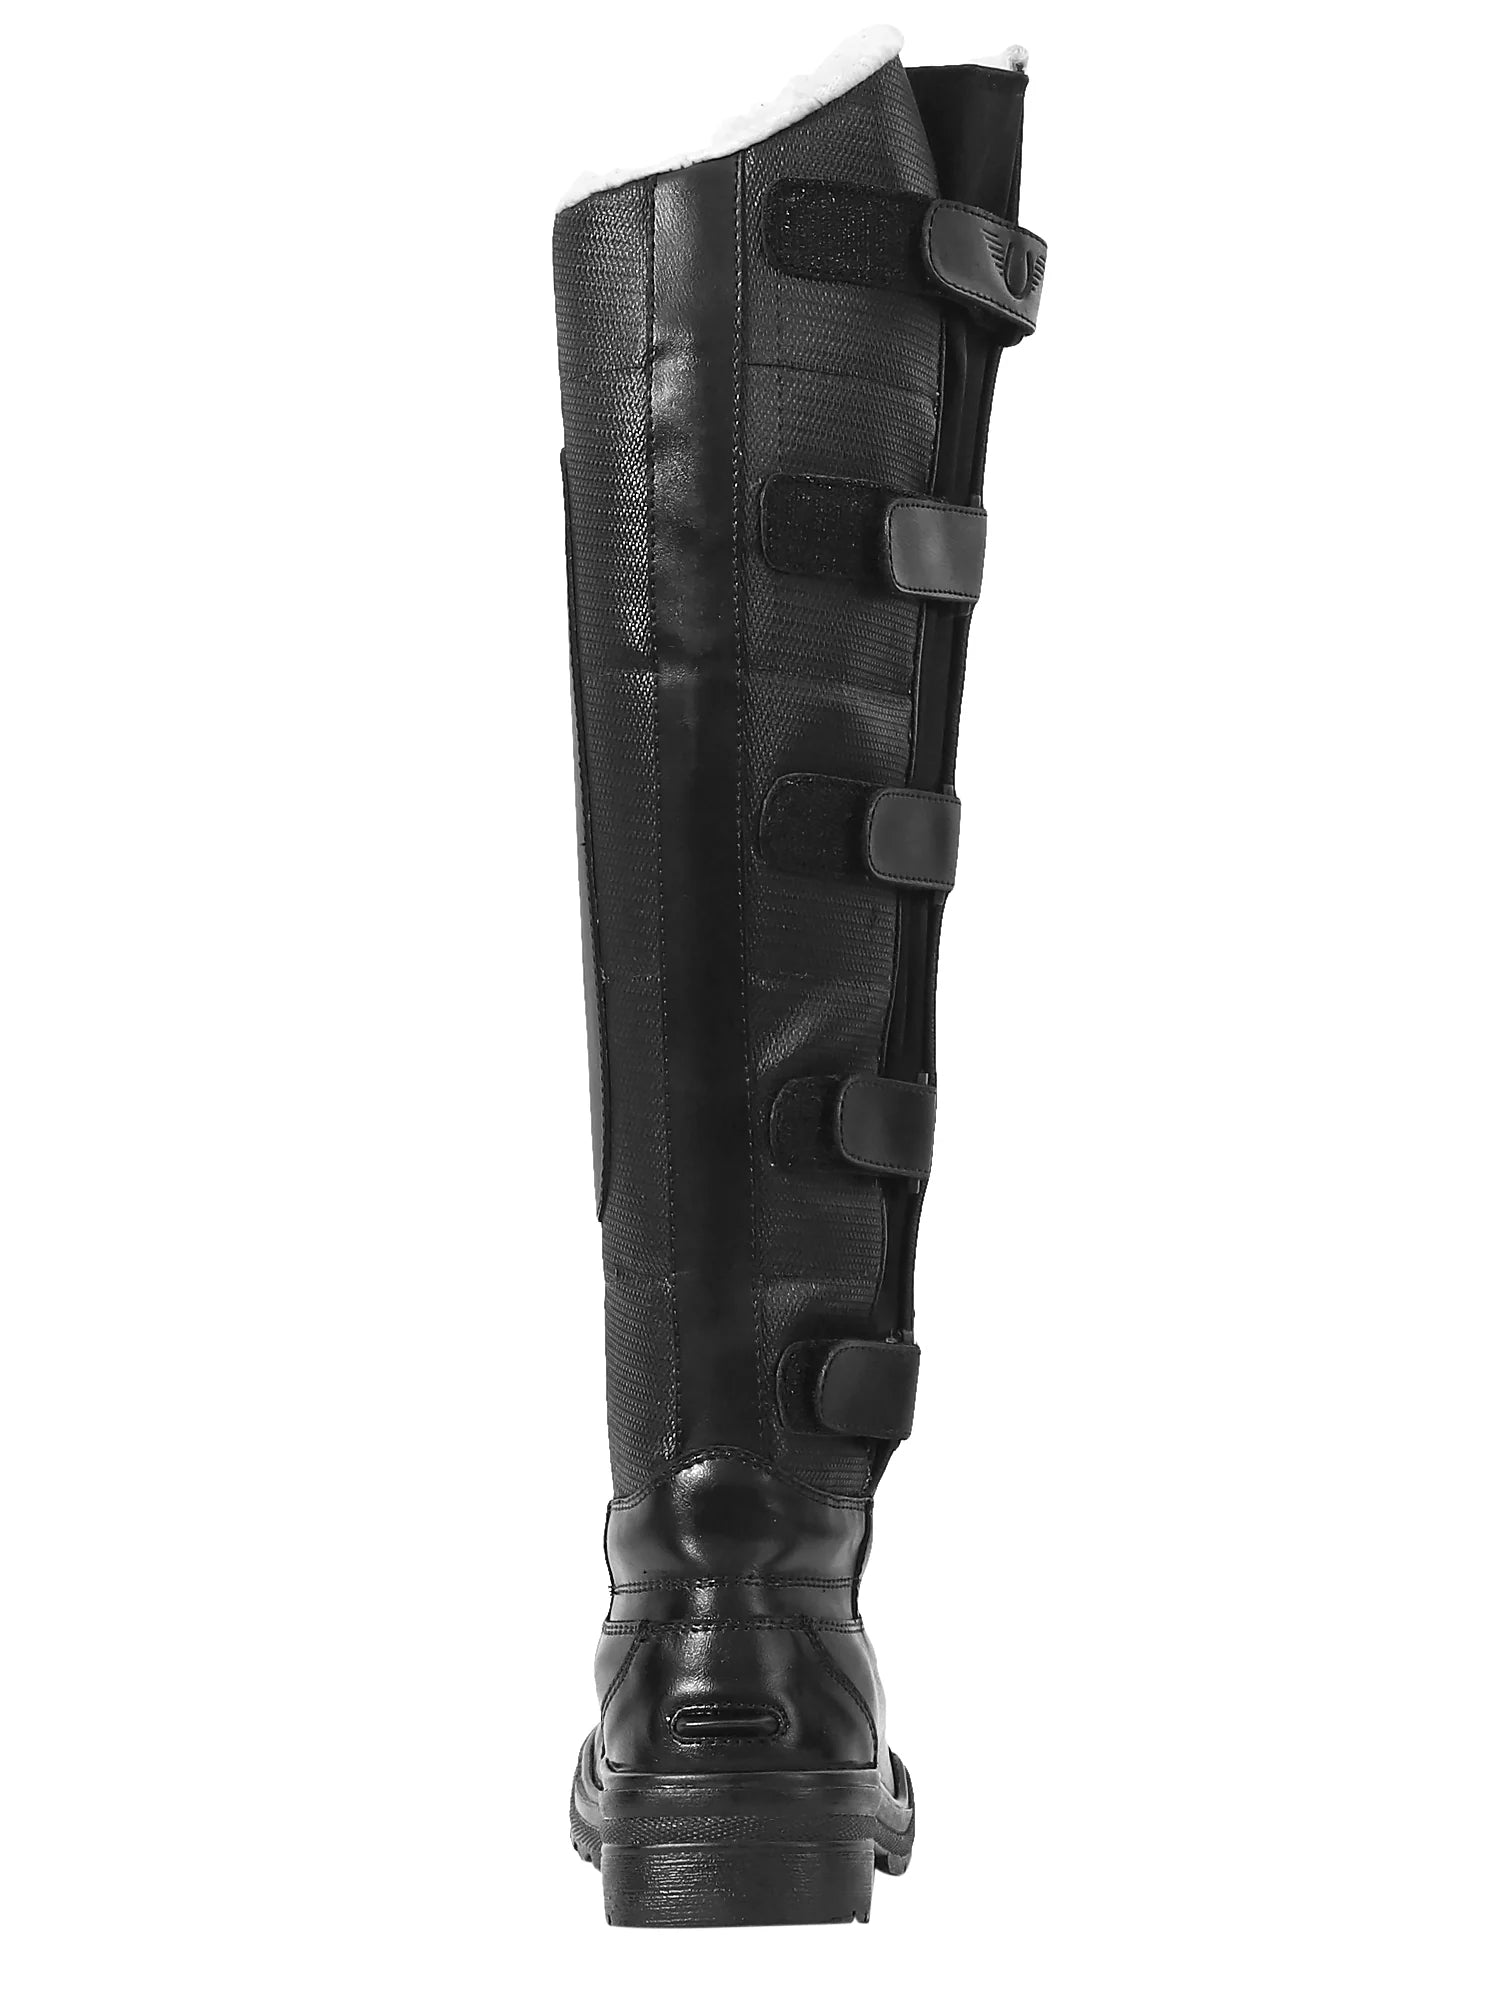 Tuffrider Tempest Tall Winter Boots - CLEARANCE